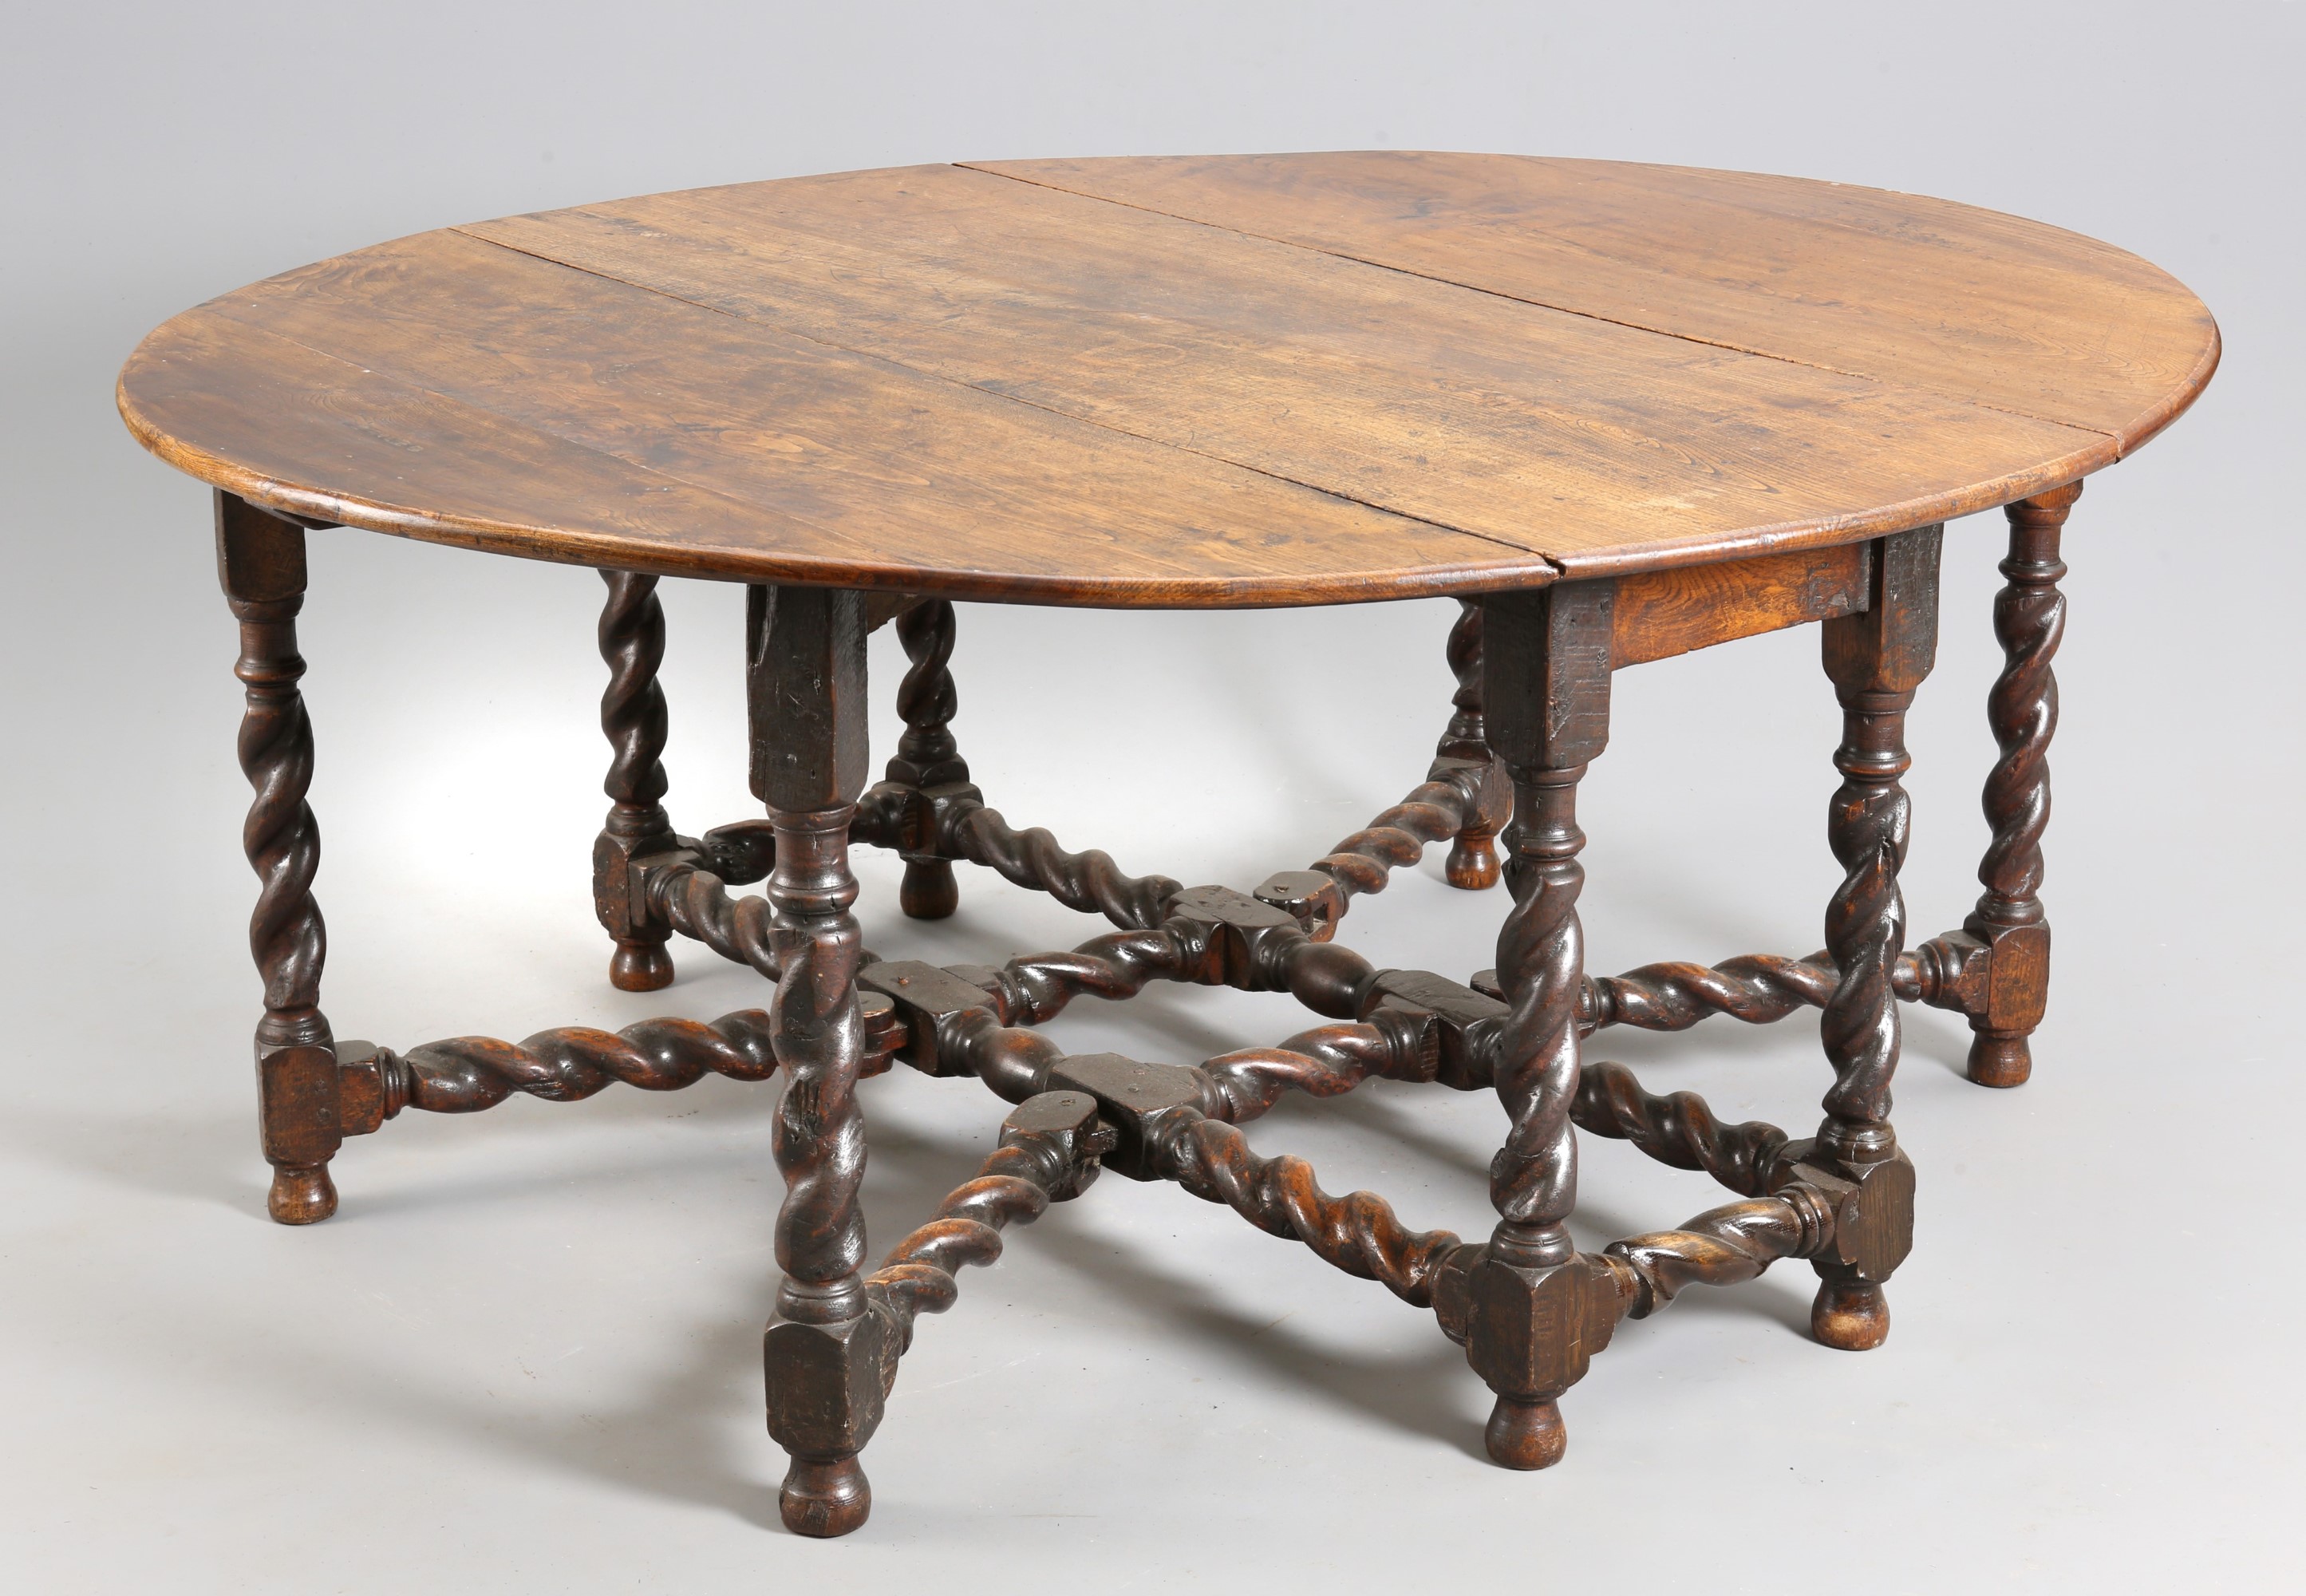 A LARGE CHARLES II JOINED OAK GATELEG DINING TABLE, CIRCA 1680 AND LATER